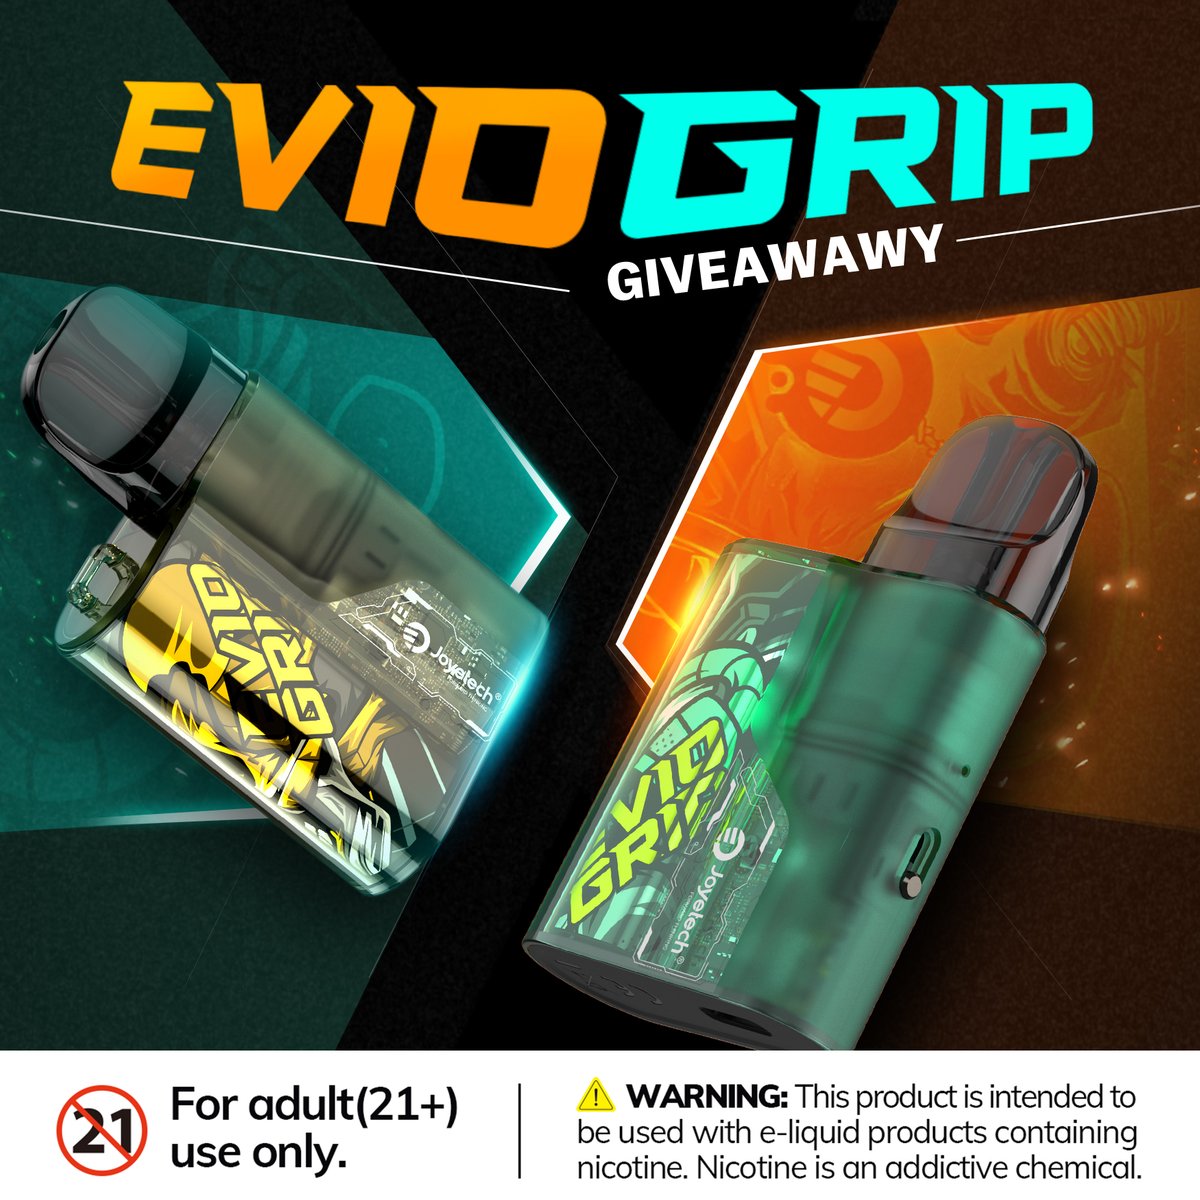 📢𝙀𝙑𝙄𝙊 𝙂𝙧𝙞𝙥 𝙂𝙞𝙫𝙚𝙖𝙬𝙖𝙮! ! ! ! Wanna try it?
Fill your favorite color in form to have a chance to win free samples.
👉：joyetech.com/giveaway/
·
Warning: This product contains nicotine. Nicotine is an addictive chemical. Must be 21+.
#Joyetech